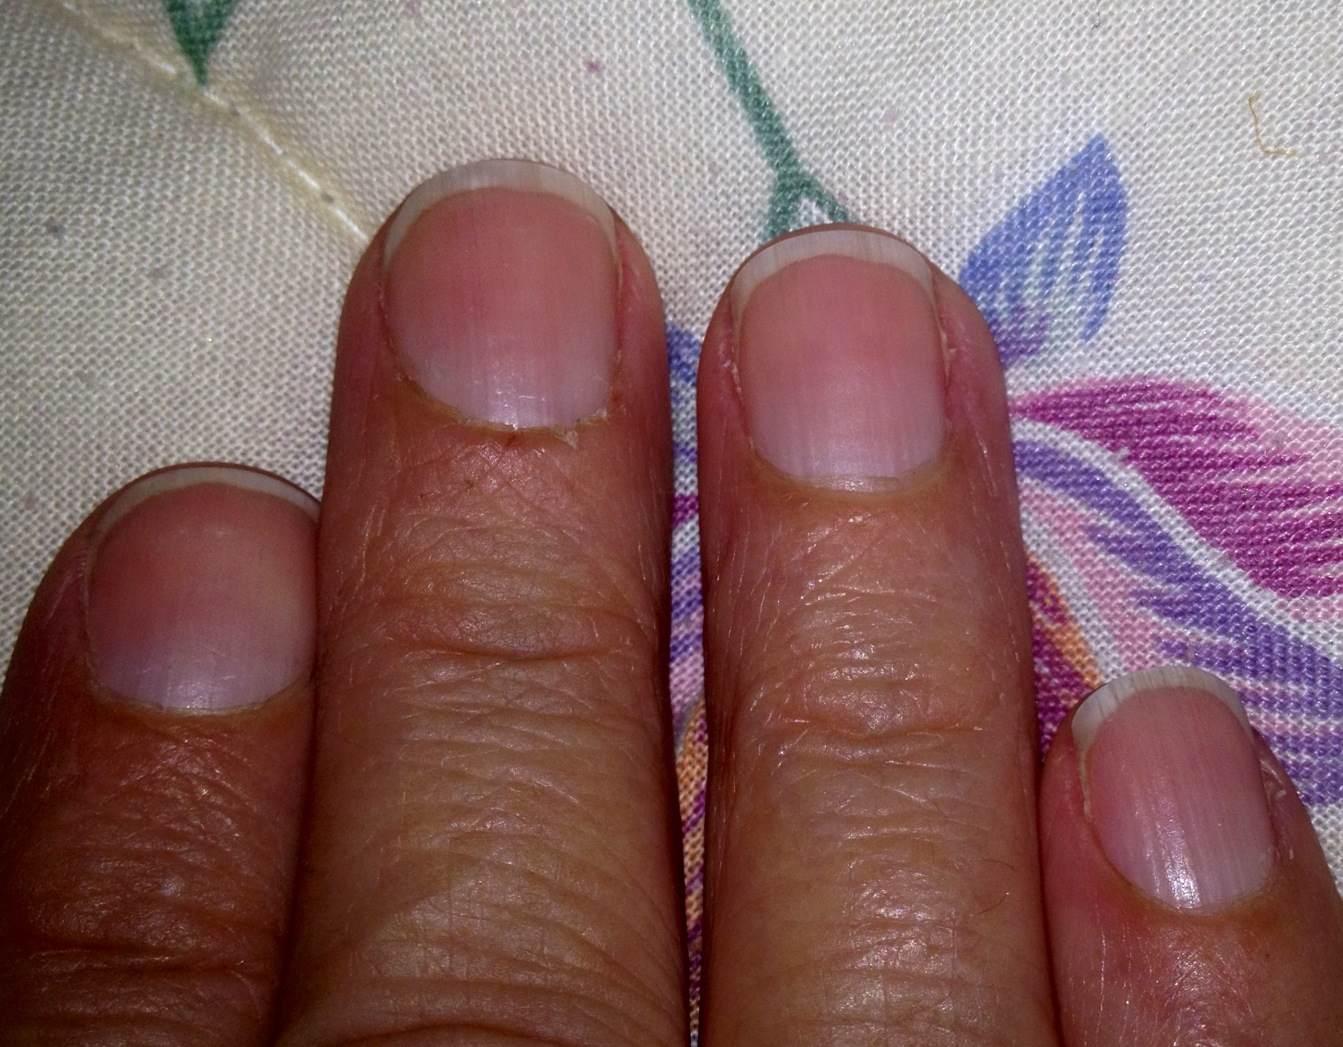 What causes dry cuticles?